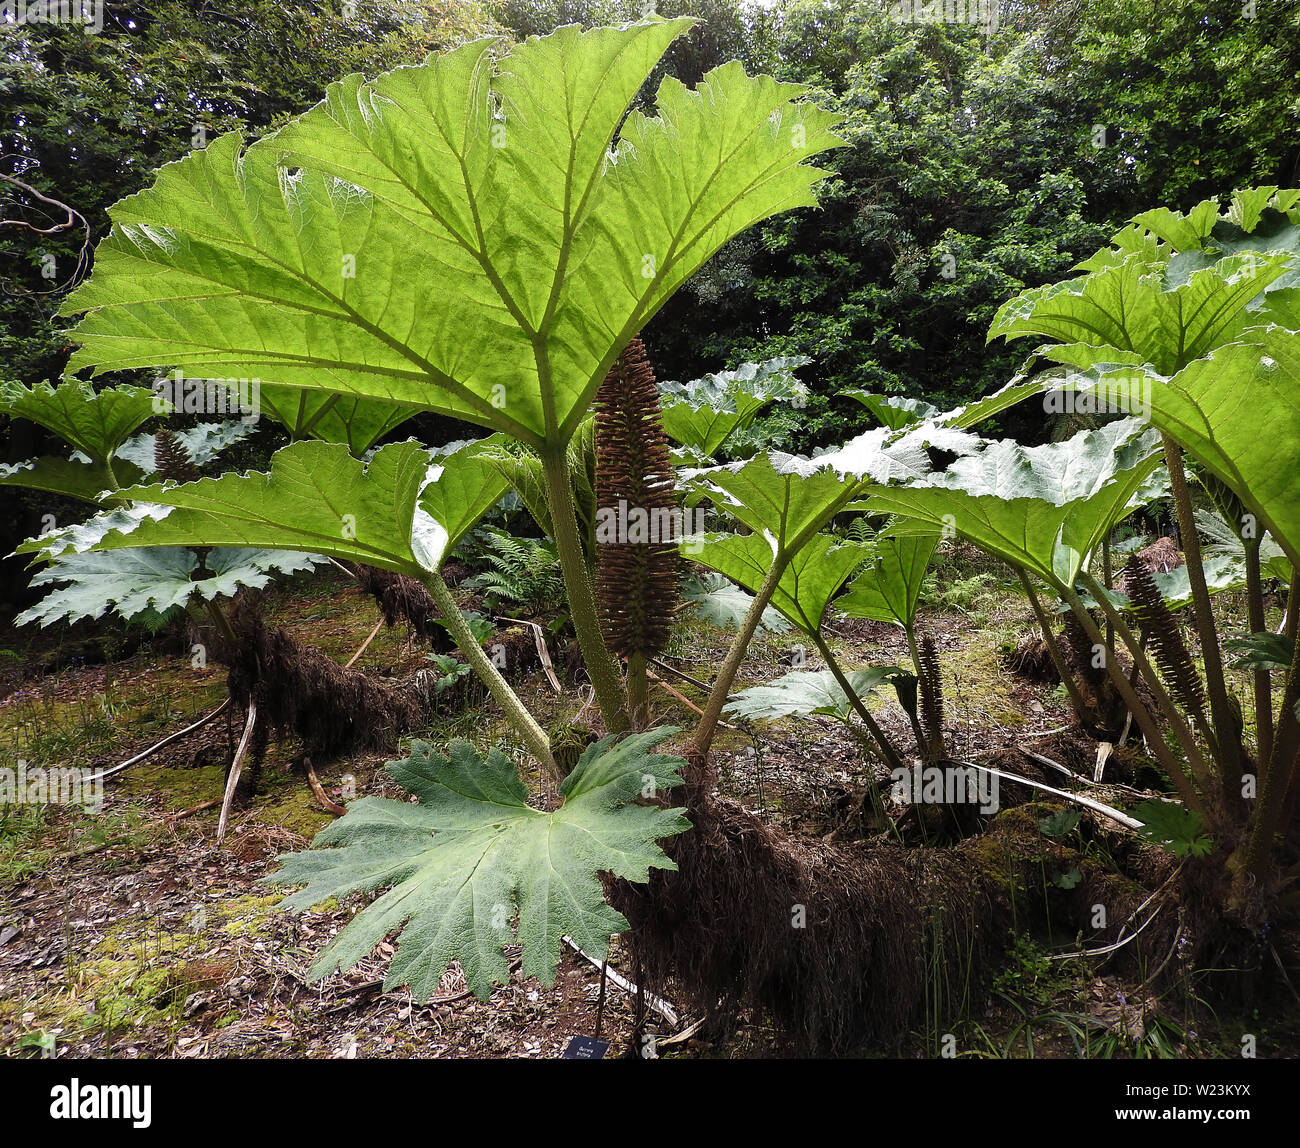 Chilean Rhubarb (Gunnera Tinctora) grows up to 2 meters tall showing the leaves and flower/seed pods. Also grows in Argentina - synonyms: Gunnera chilensis, Gunnera scabra, nalca and pangue -- Unrelated to true rhubarb but similarly used for culinary purposes. Classified as an invasive species in the EU Stock Photo